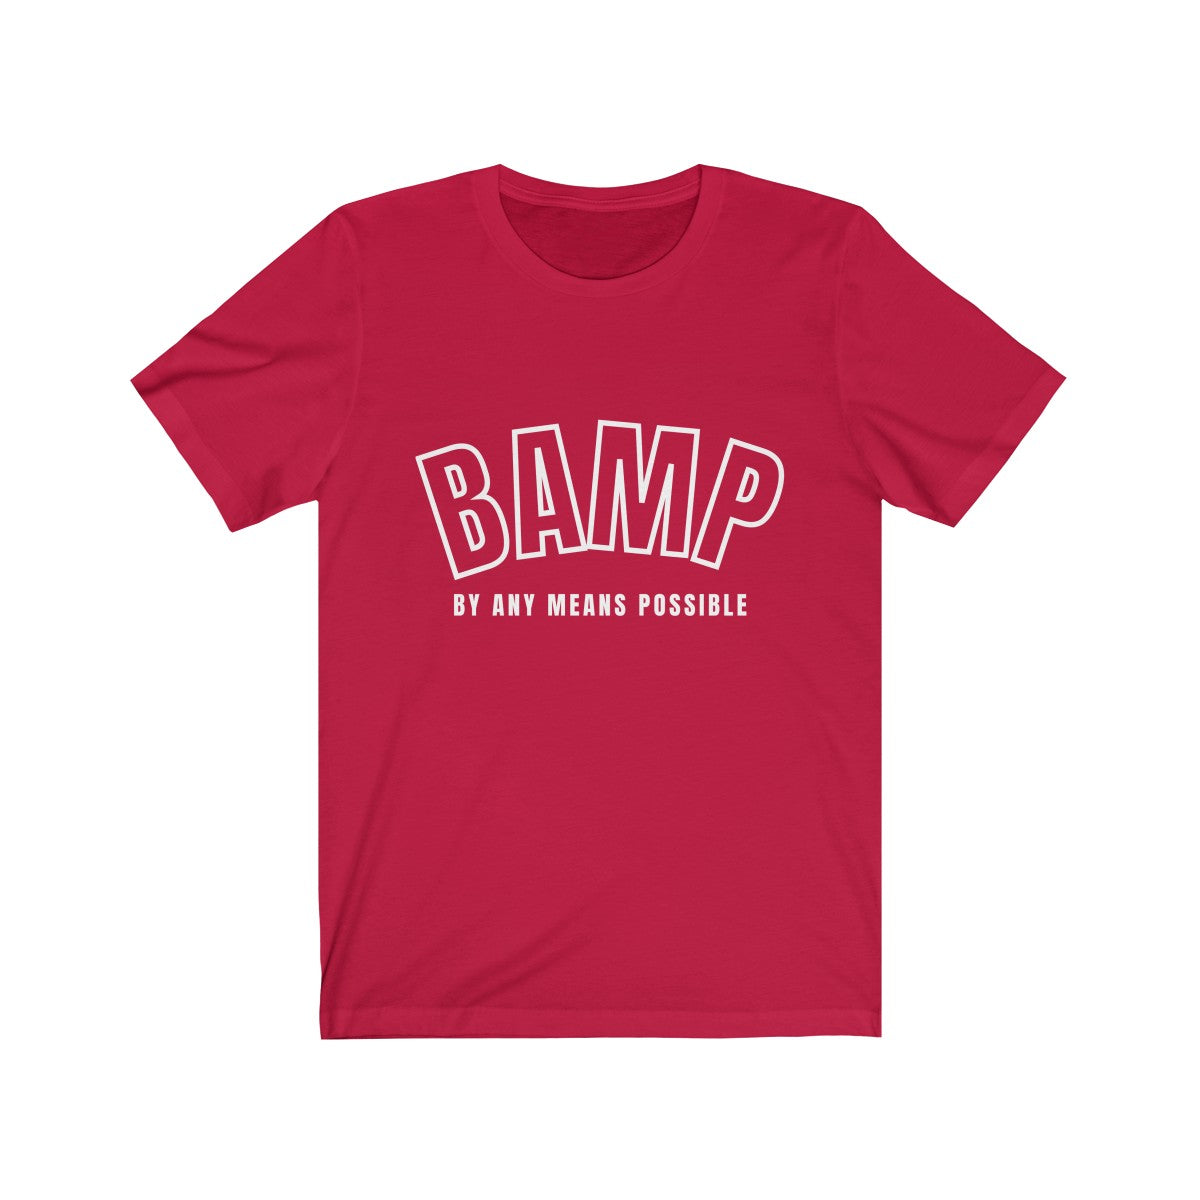 BAMP - By Any Means Possible - Ver 3 - Unisex T-Shirt (4 Colors) - Beyond The Walls Int'l